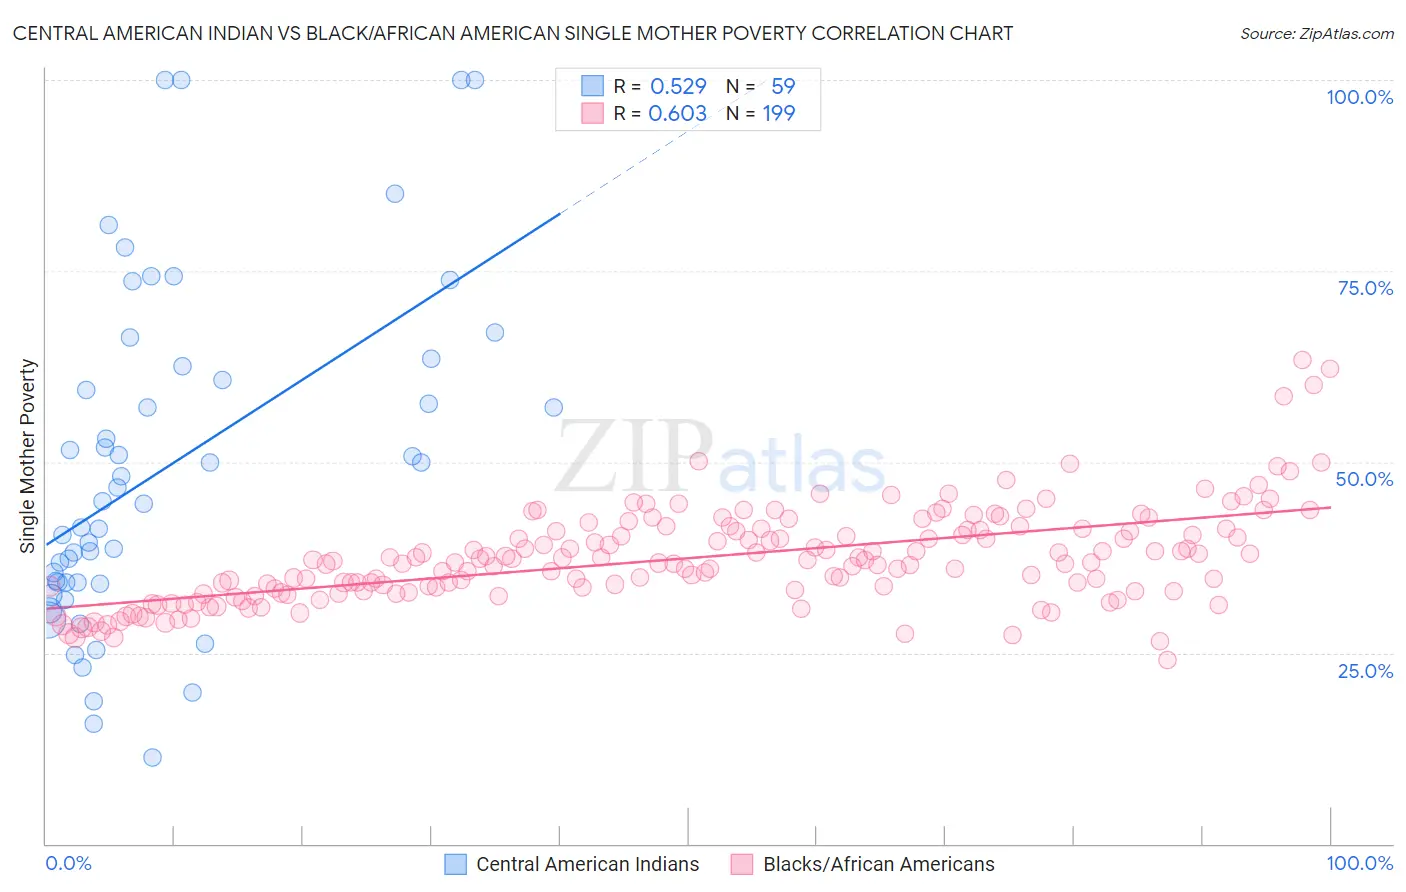 Central American Indian vs Black/African American Single Mother Poverty